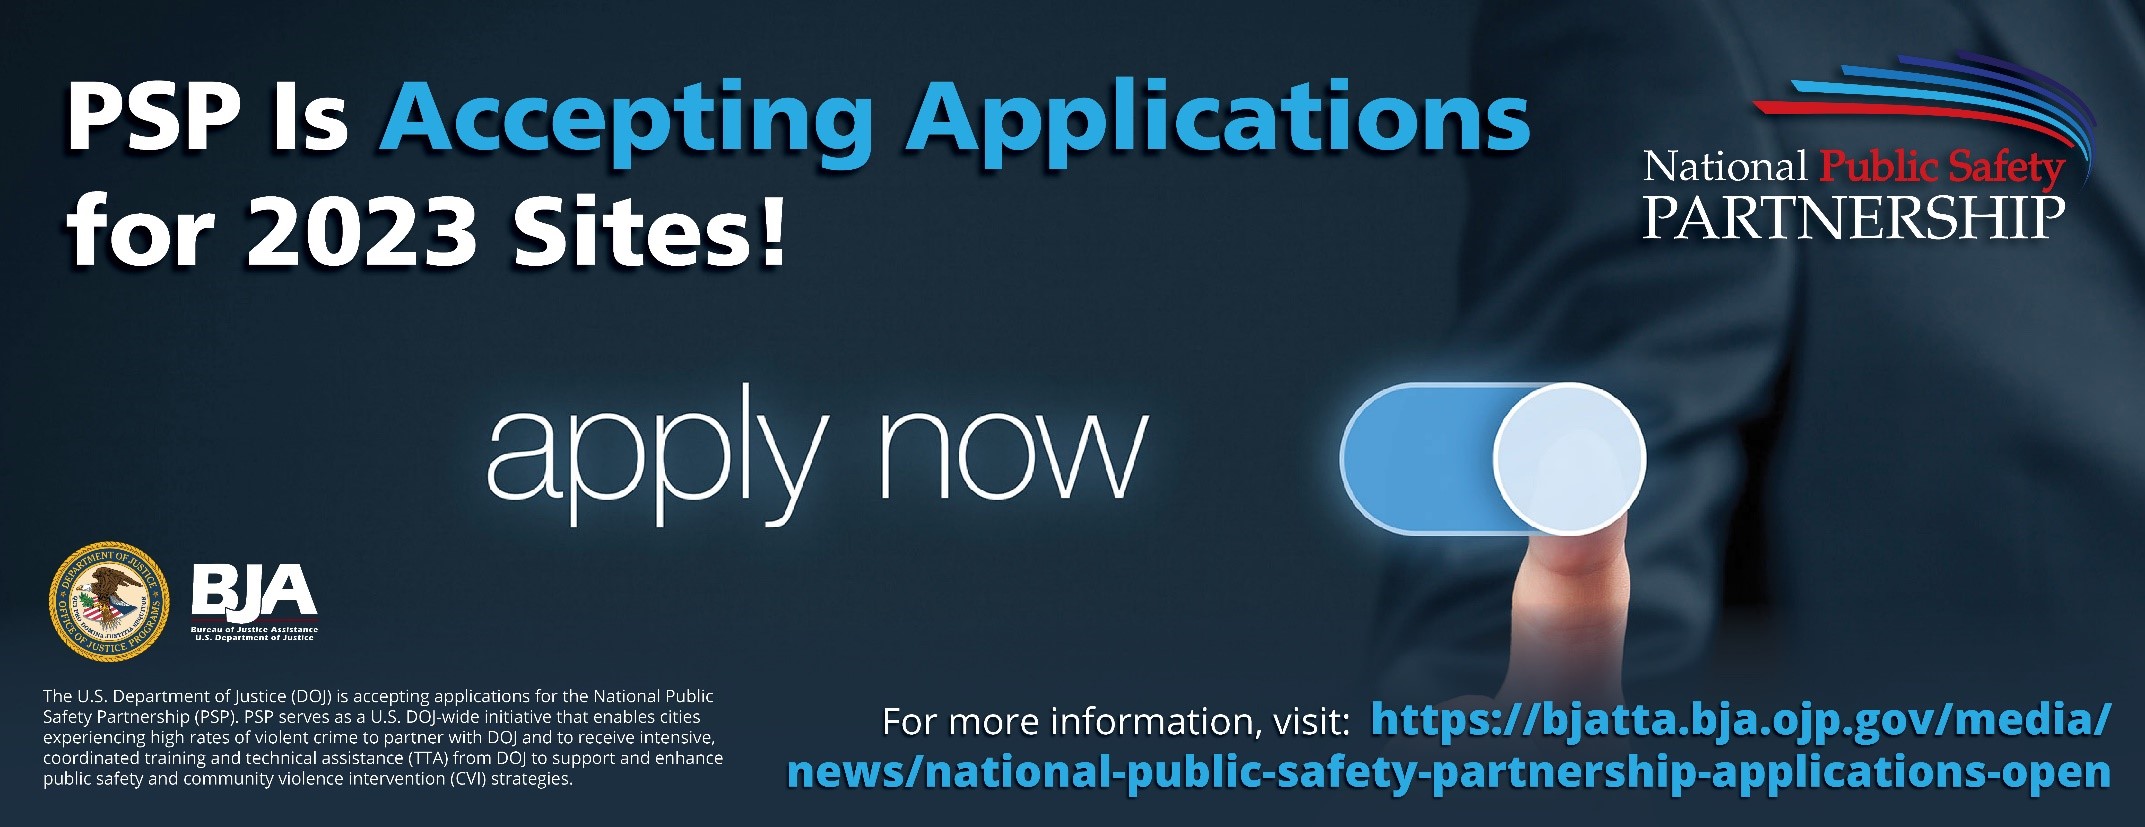 PSP is accepting applications for 2023 Sites. Apply Now.